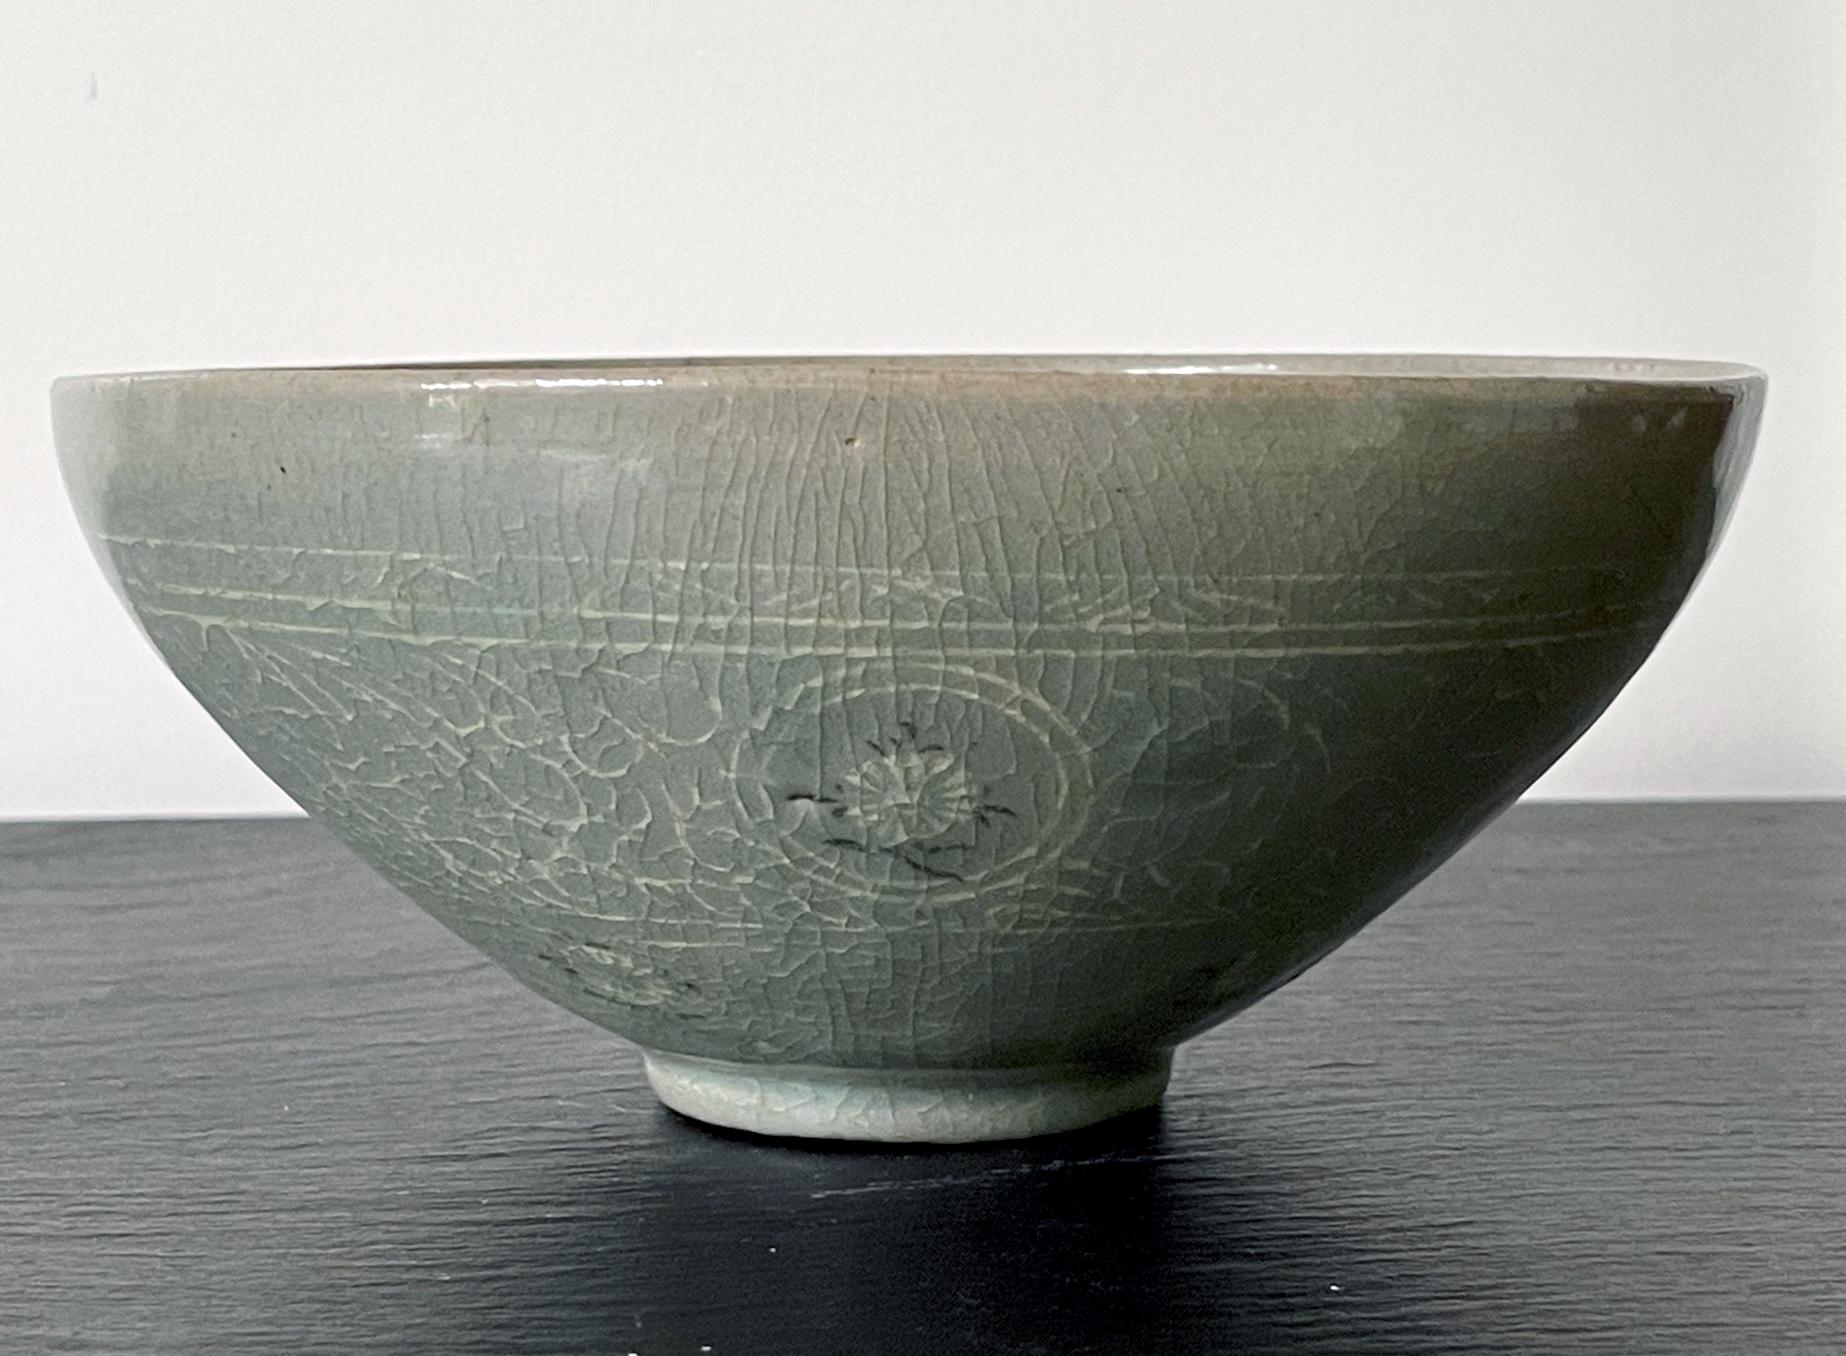 A superb Korean celadon bowl with elaborate slip inlays circa 12th century from the Goryeo Dynasties (918 to 1392AD). Despite inspired originally by the celadons from Song Dynasty in China, the development of celadon in Korean peninsula took its own